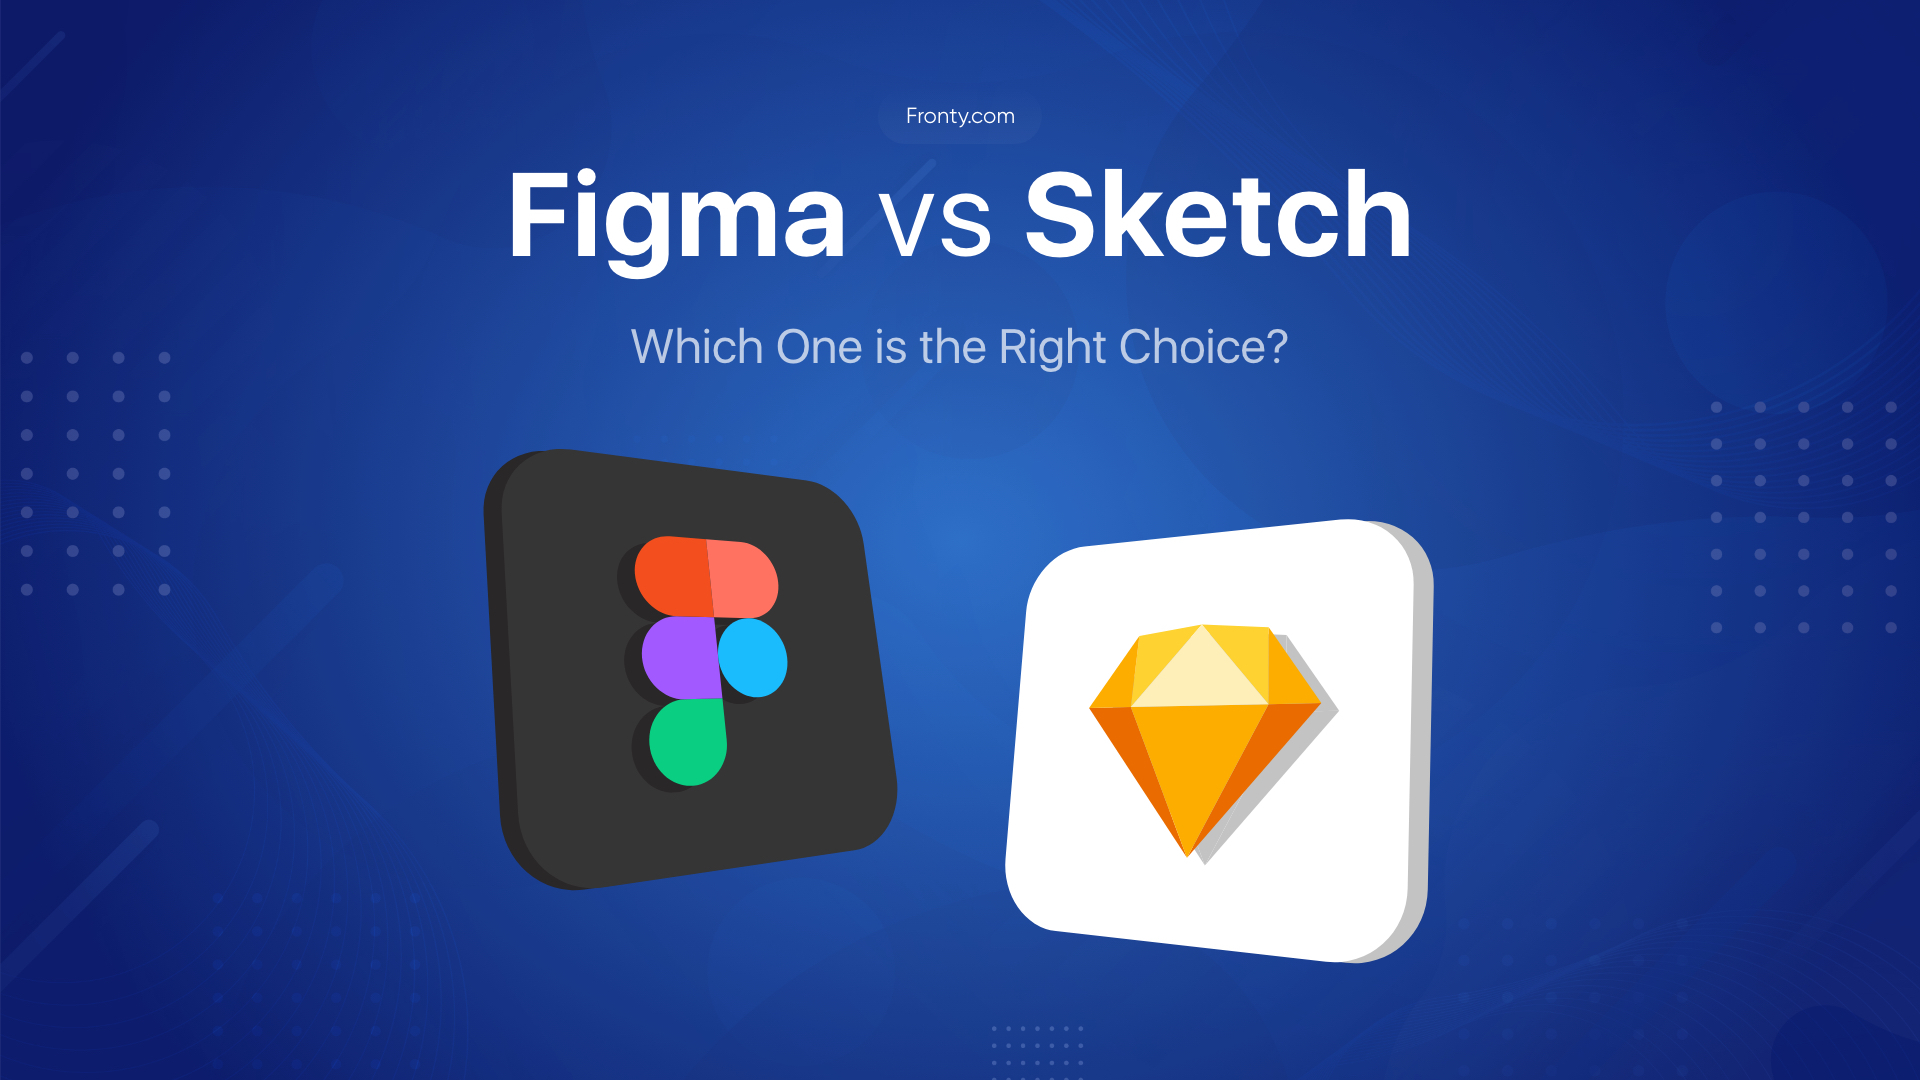 Figma vs Sketch is there a right choice